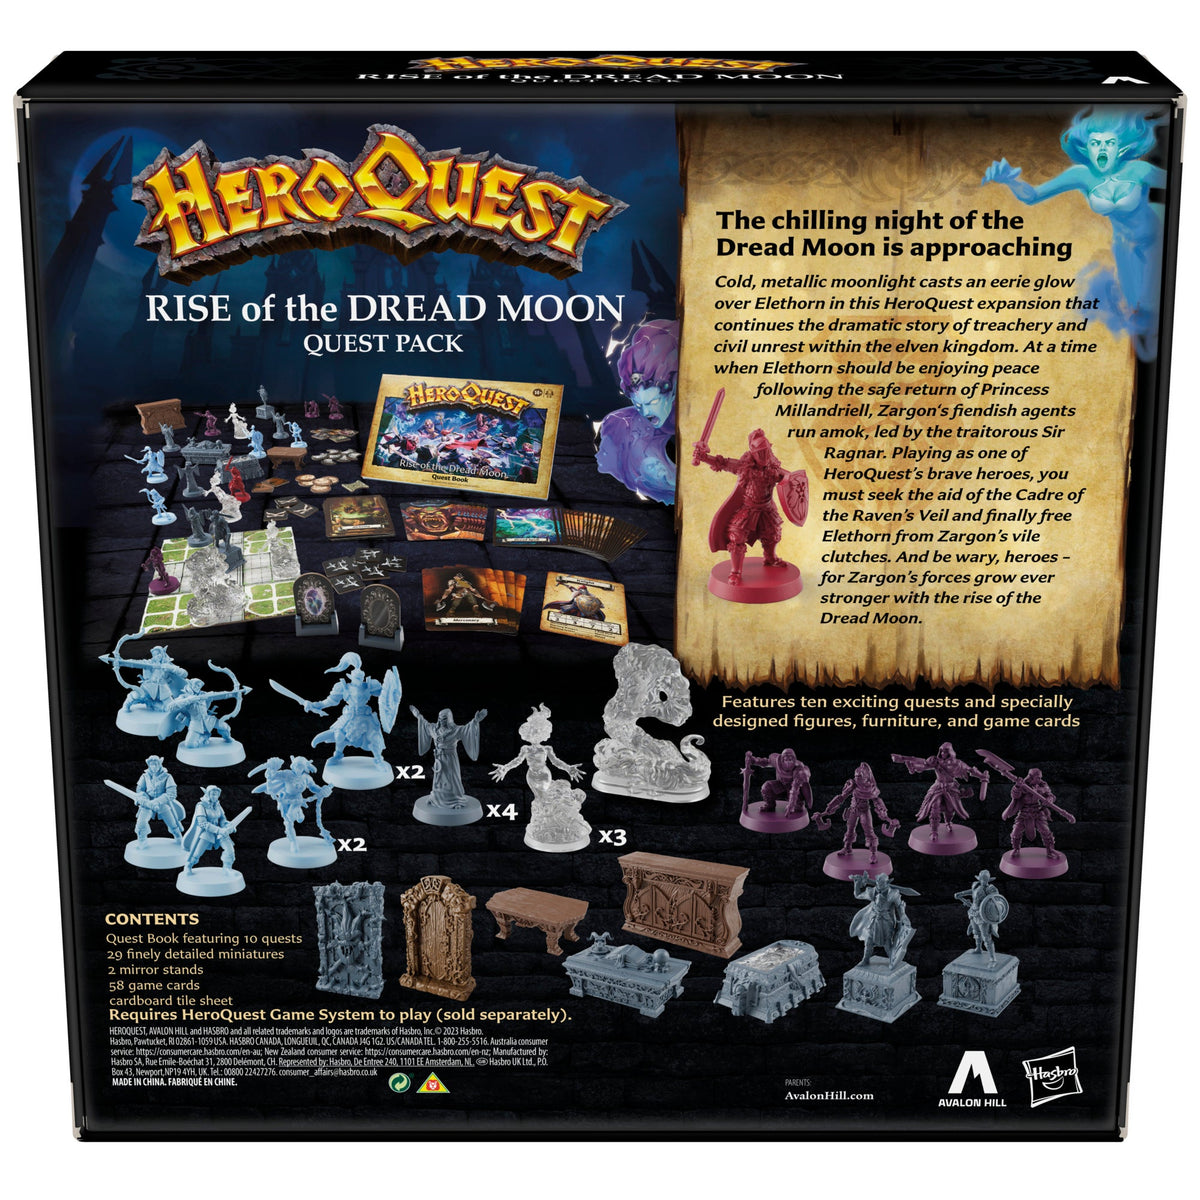  HeroQuest Rise of The Dread Moon Quest Pack, Requires